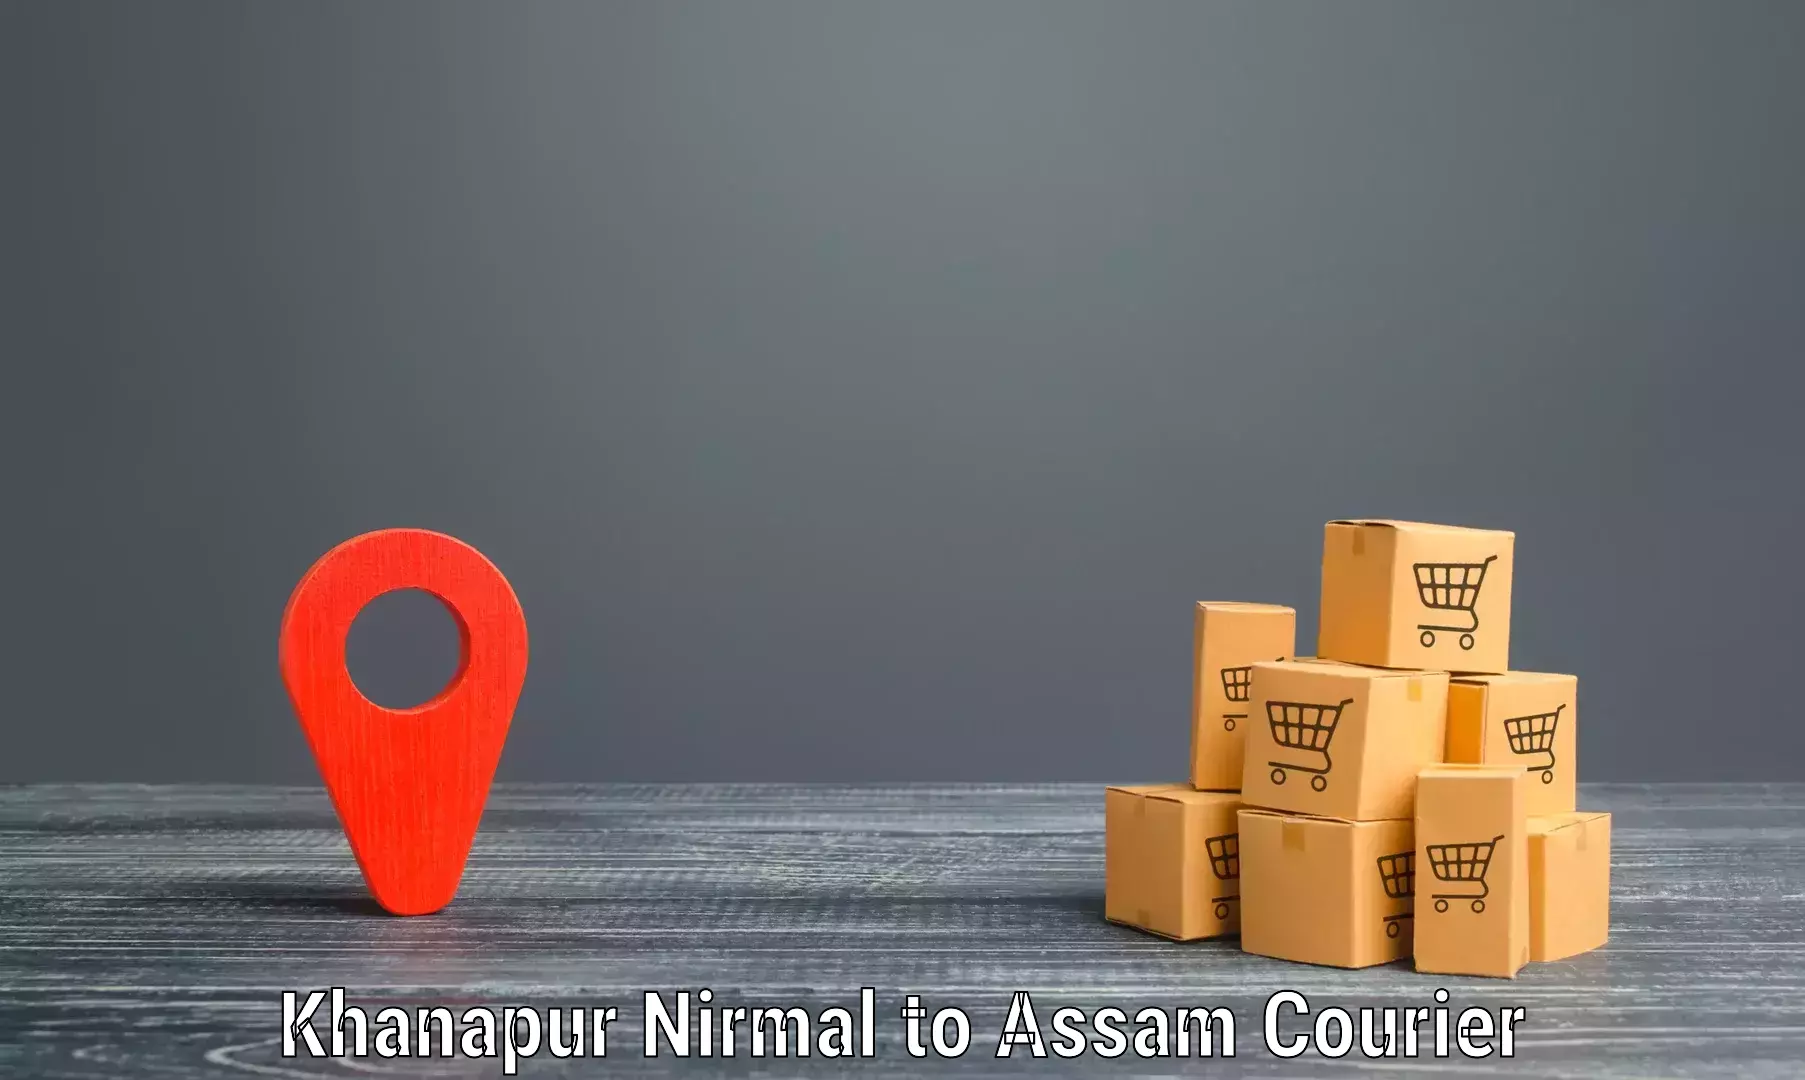 Flexible delivery schedules Khanapur Nirmal to Dibrugarh University